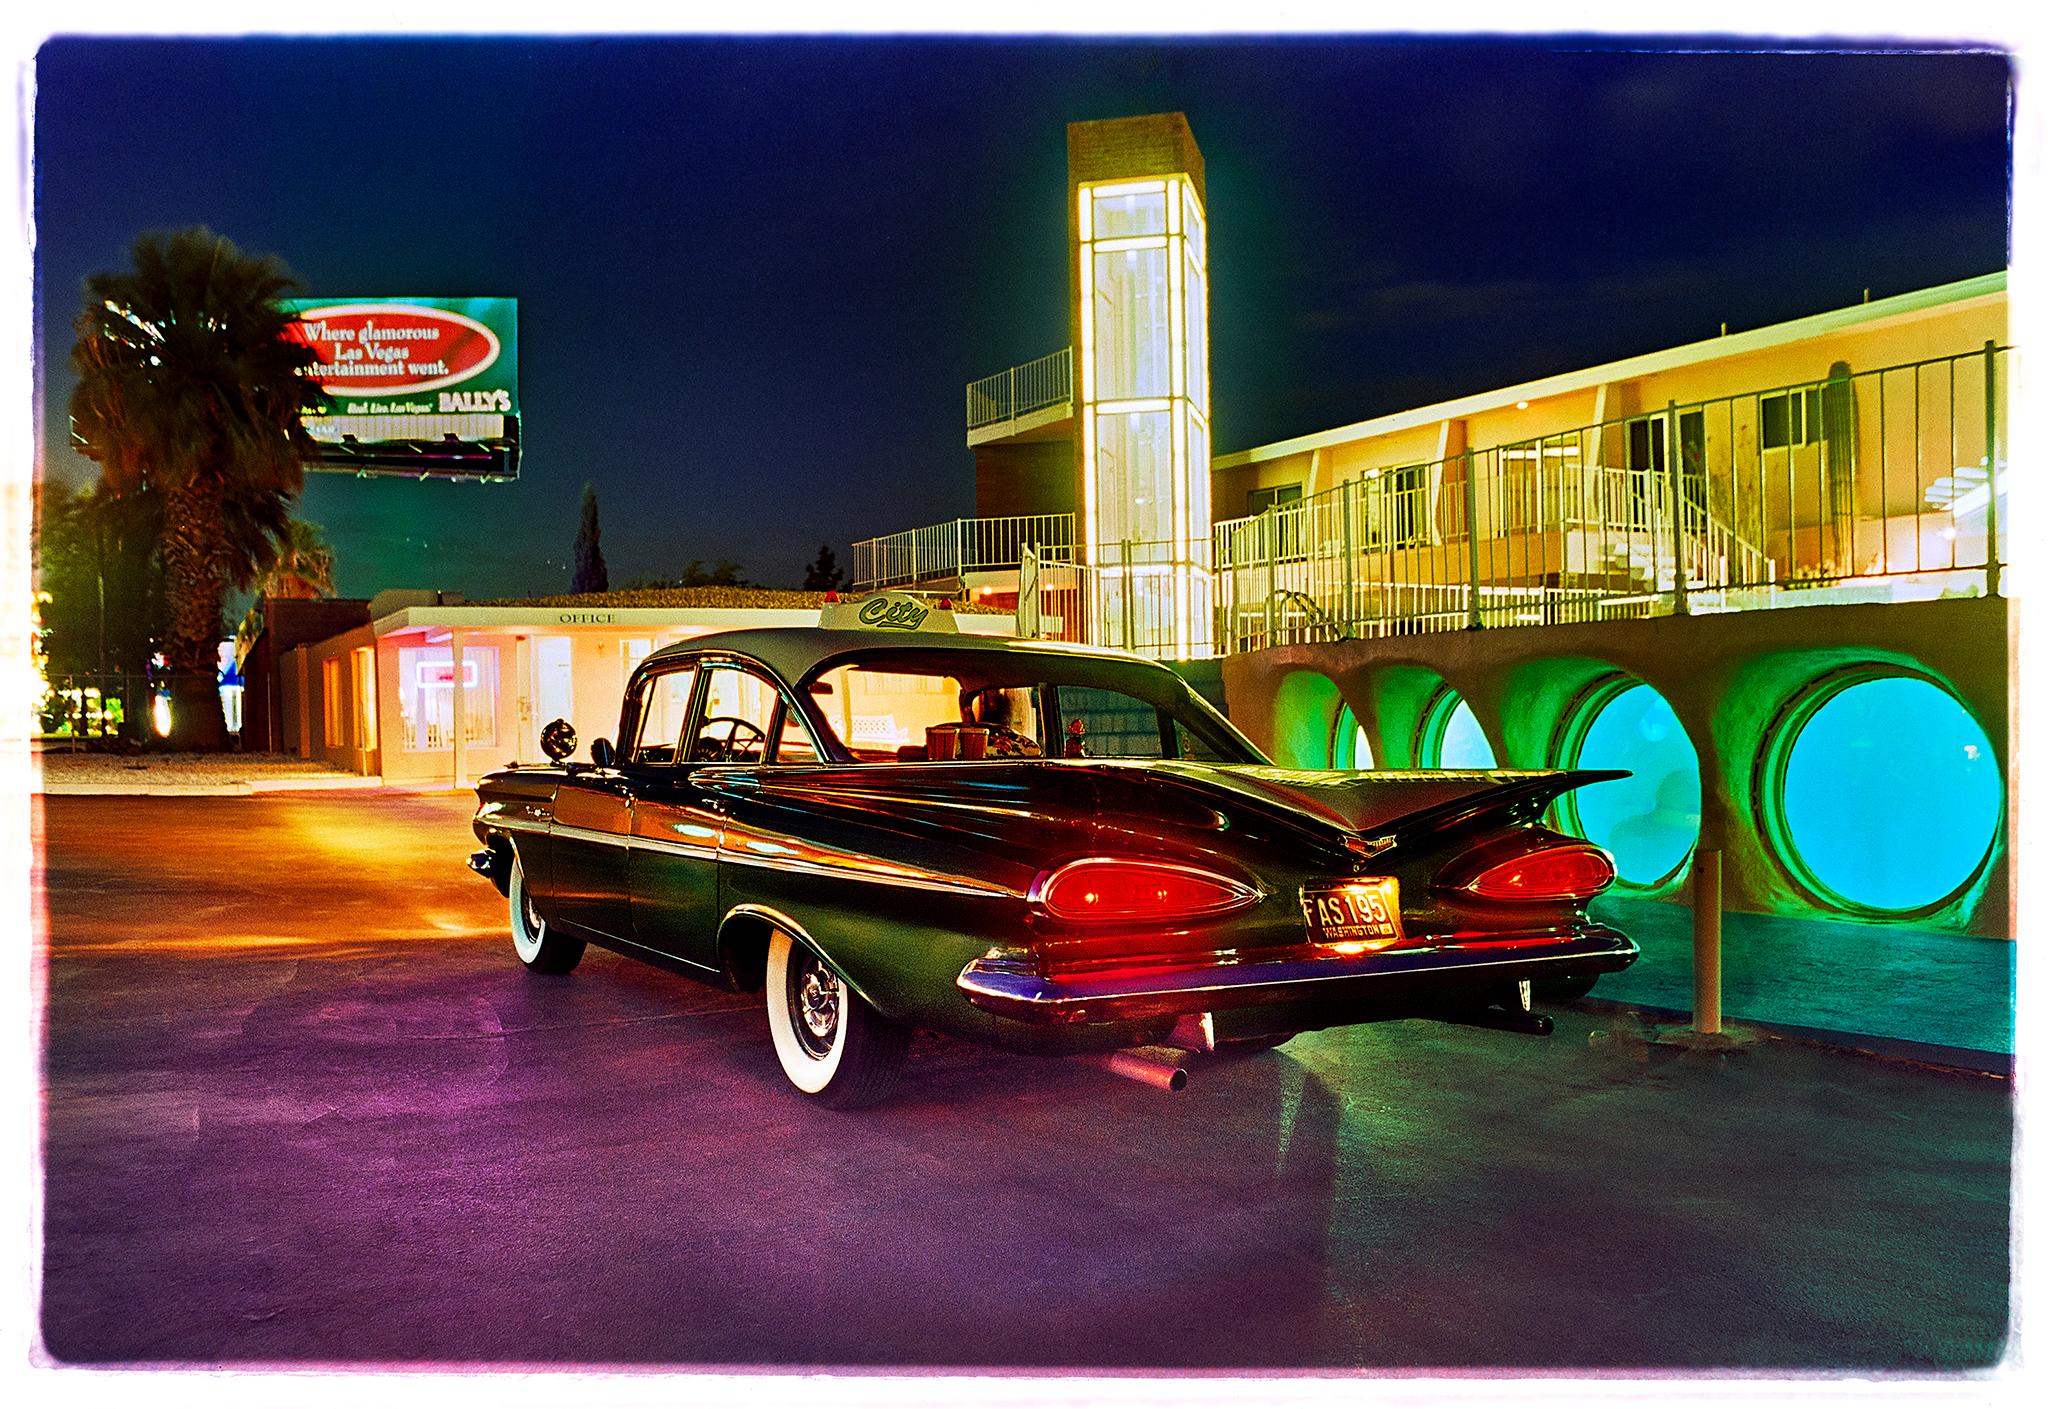 Capturing the cinematic Glass Pool Motel which is sadly no longer there, and an iconic Chevy Bel Air, it is a perfect example of a Lost Vegas. This is one of Richard Heeps' classic Americana photographs, from his 'Dream in Colour' Series which